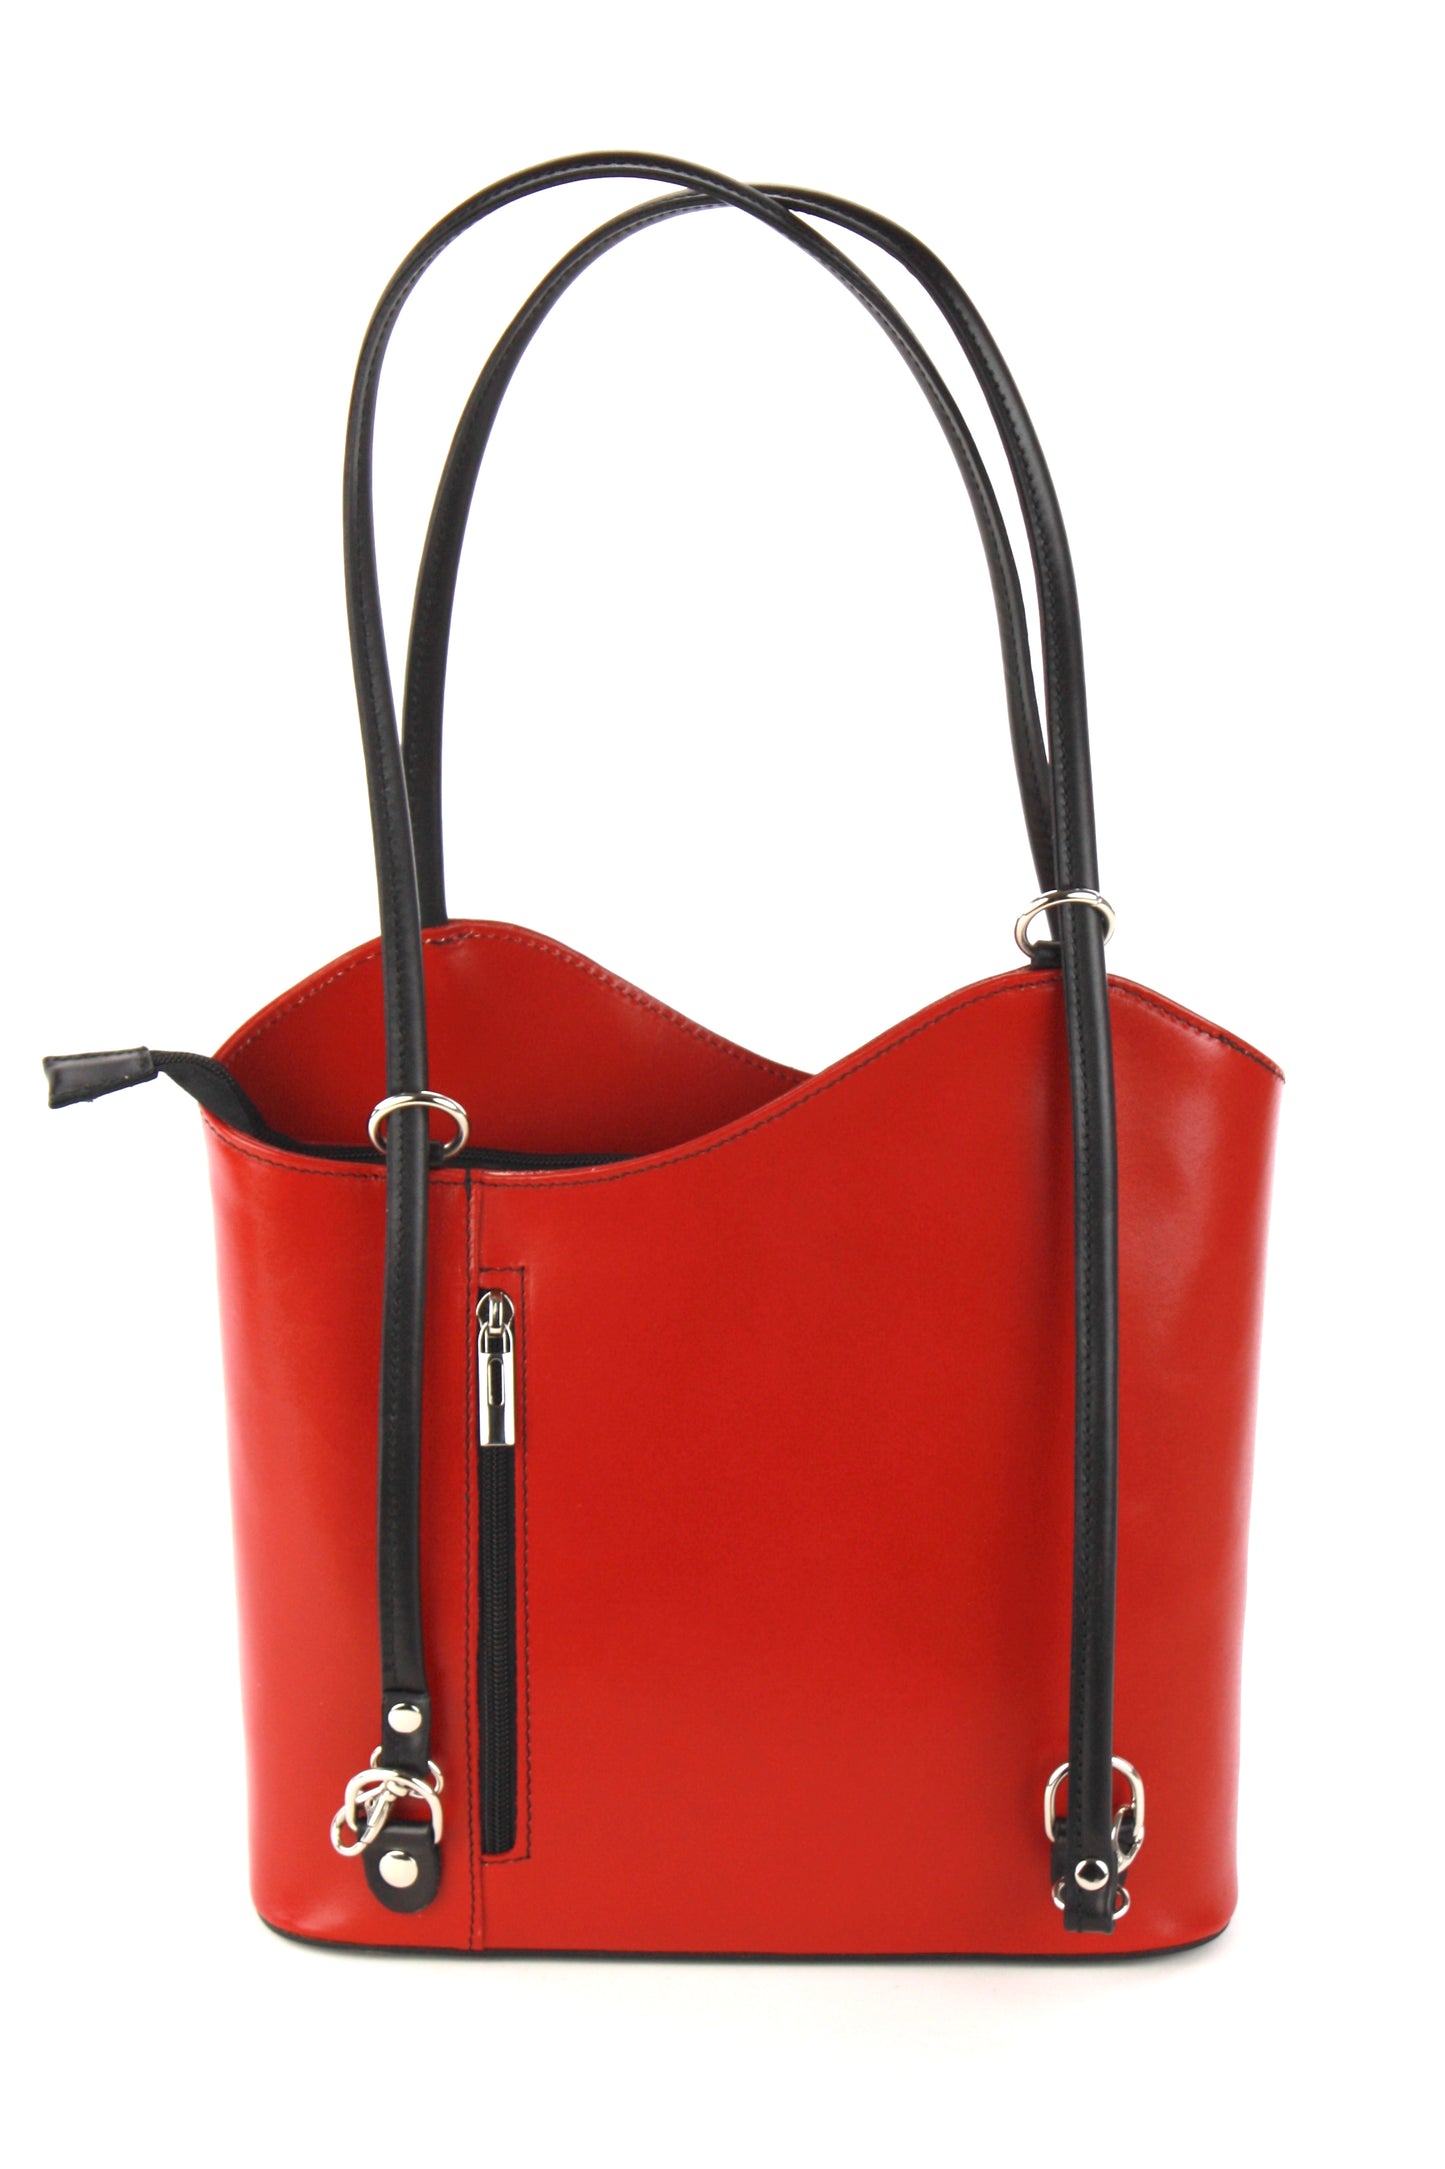 Cloe hand bag in red with black trim